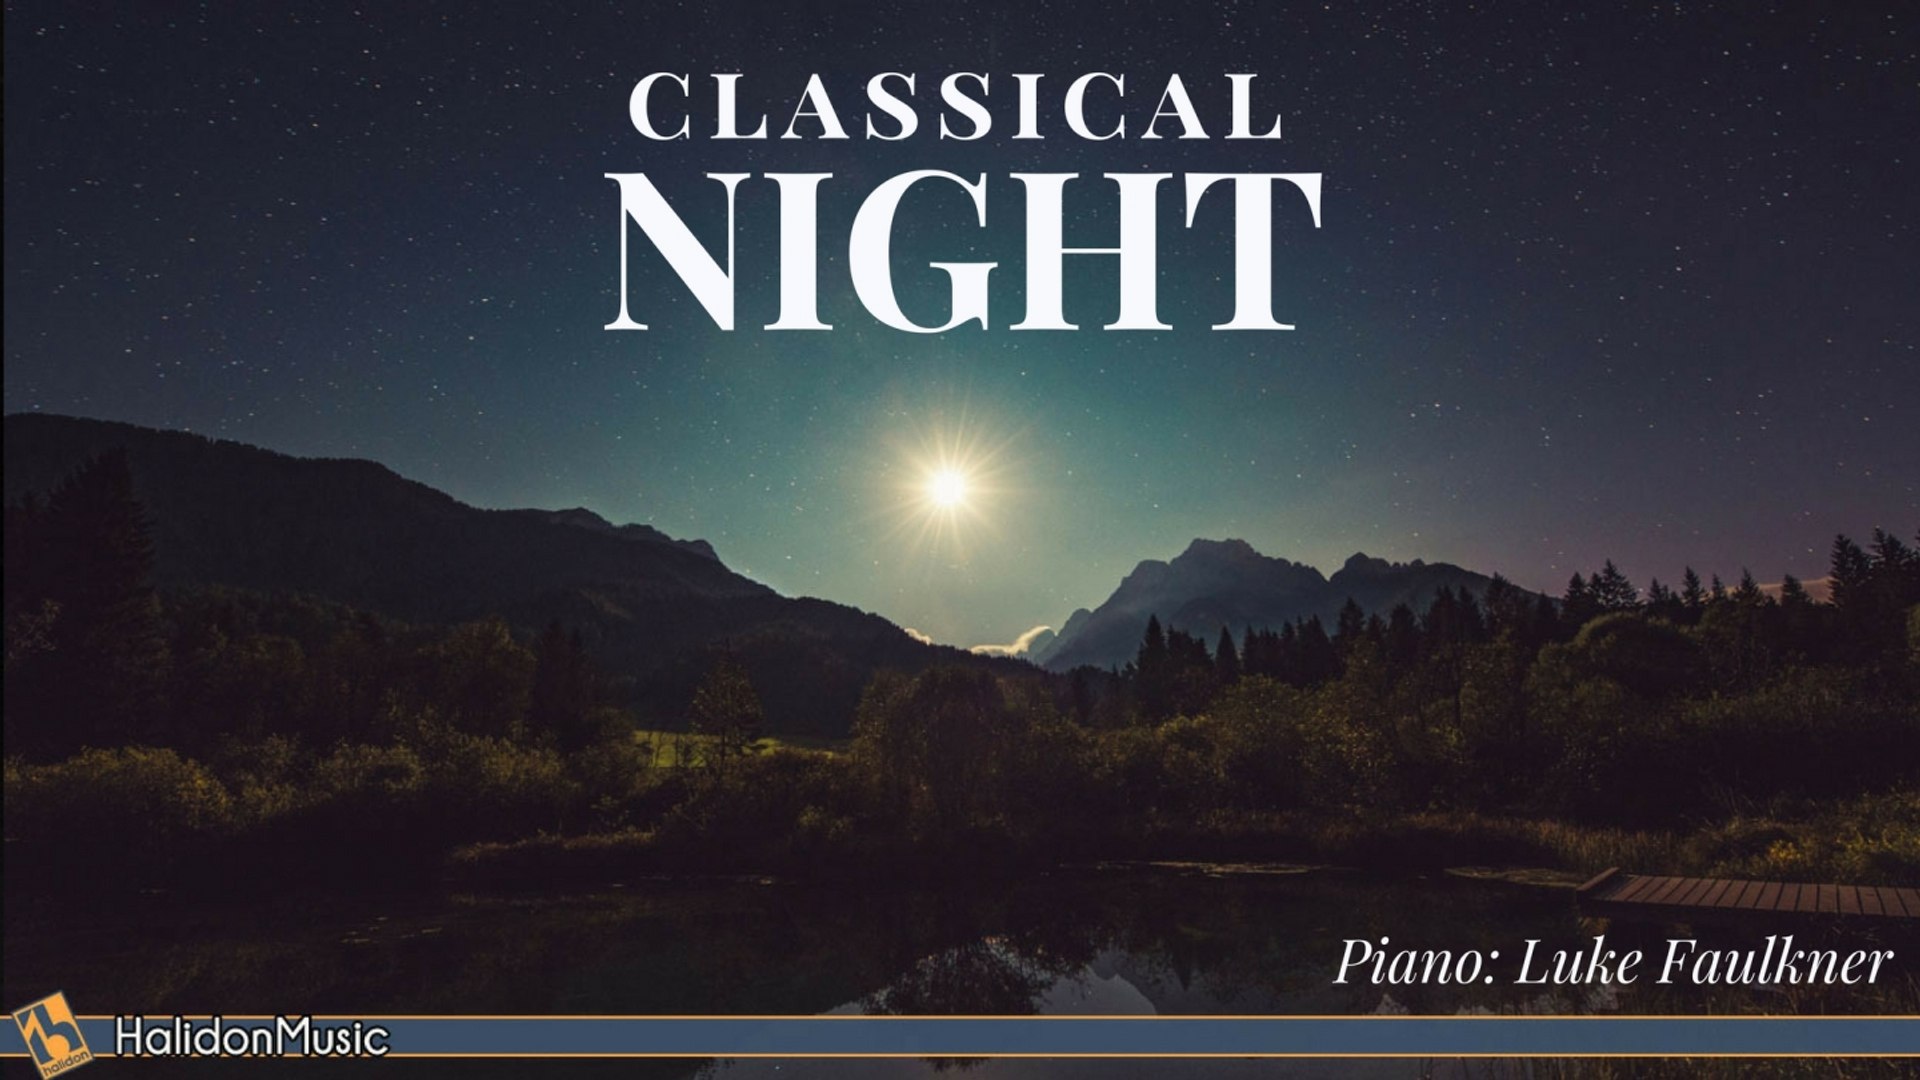 Luke Faulkner - Classical Night: Nocturnes & Music by the Moonlight